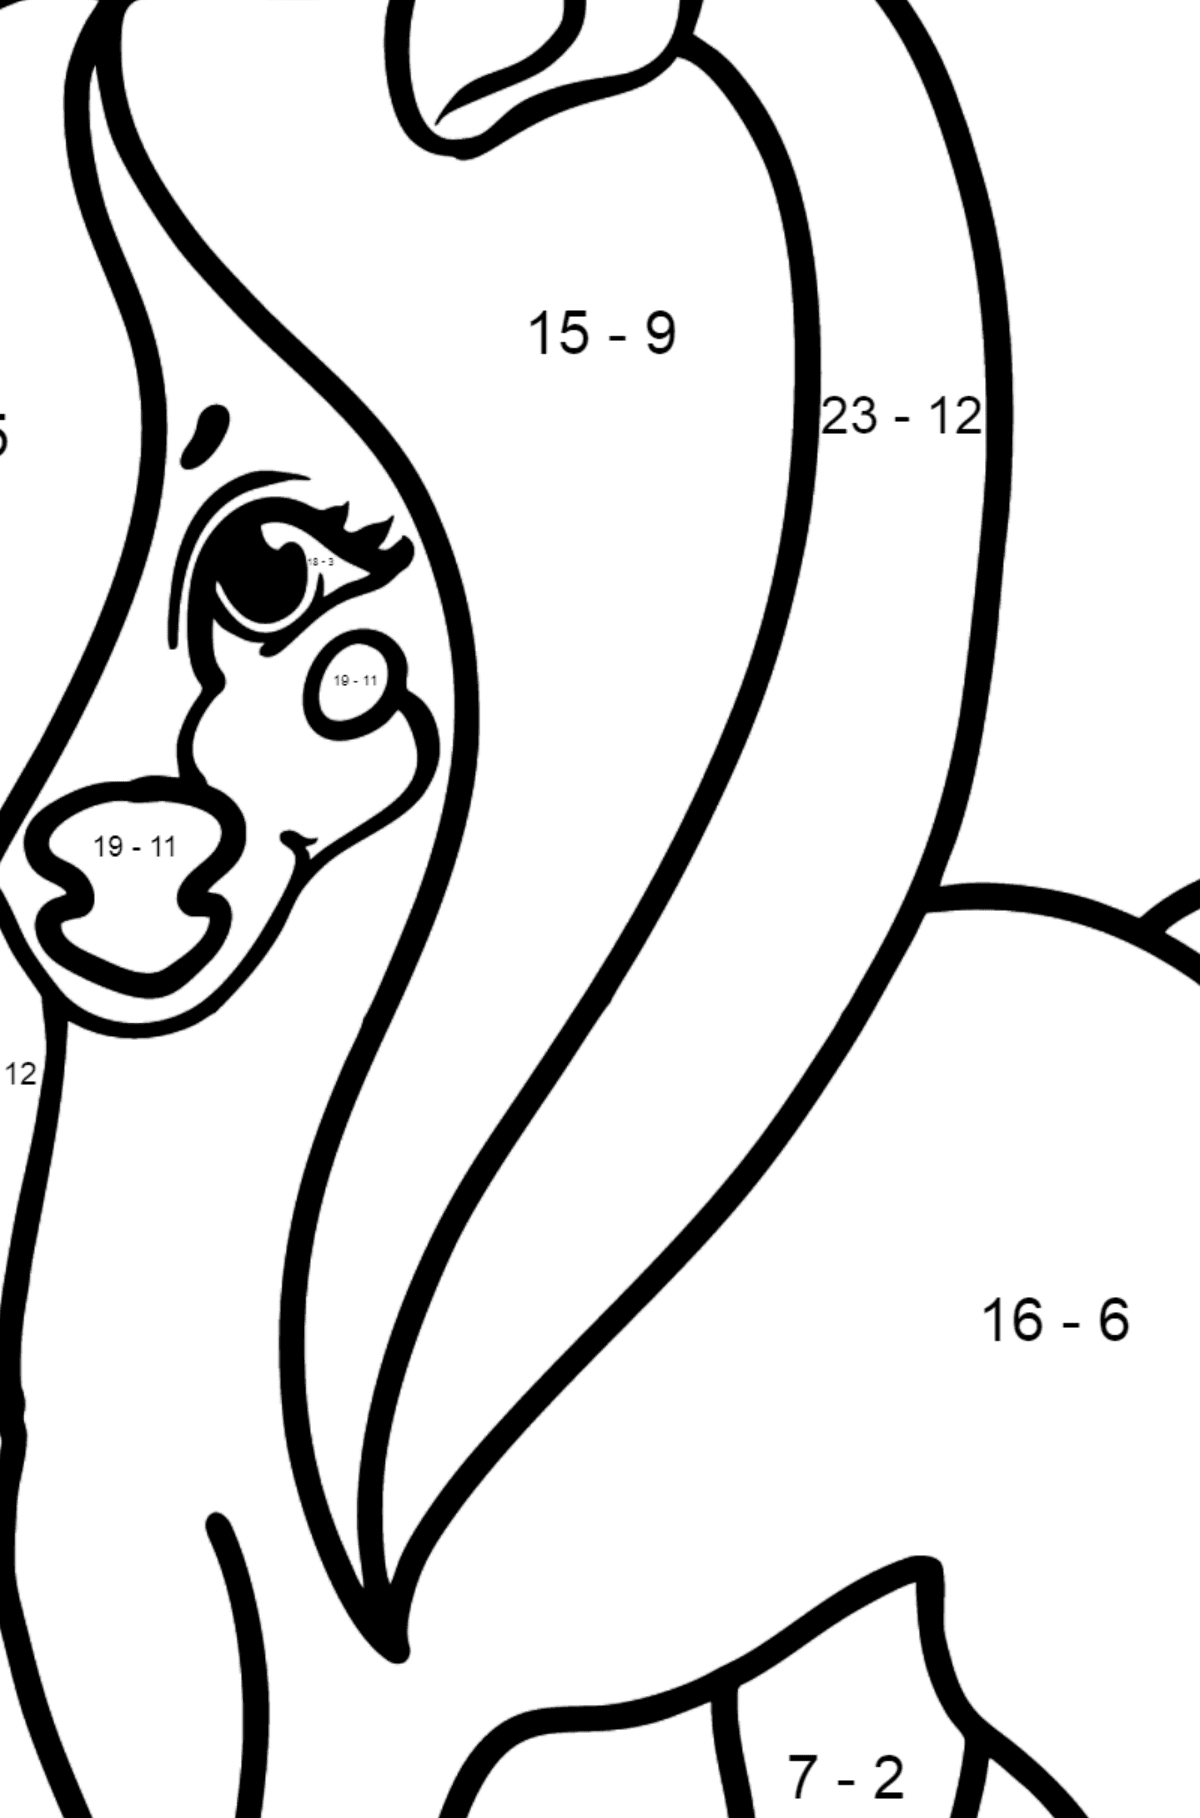 Pony Princess coloring page - Math Coloring - Subtraction for Kids